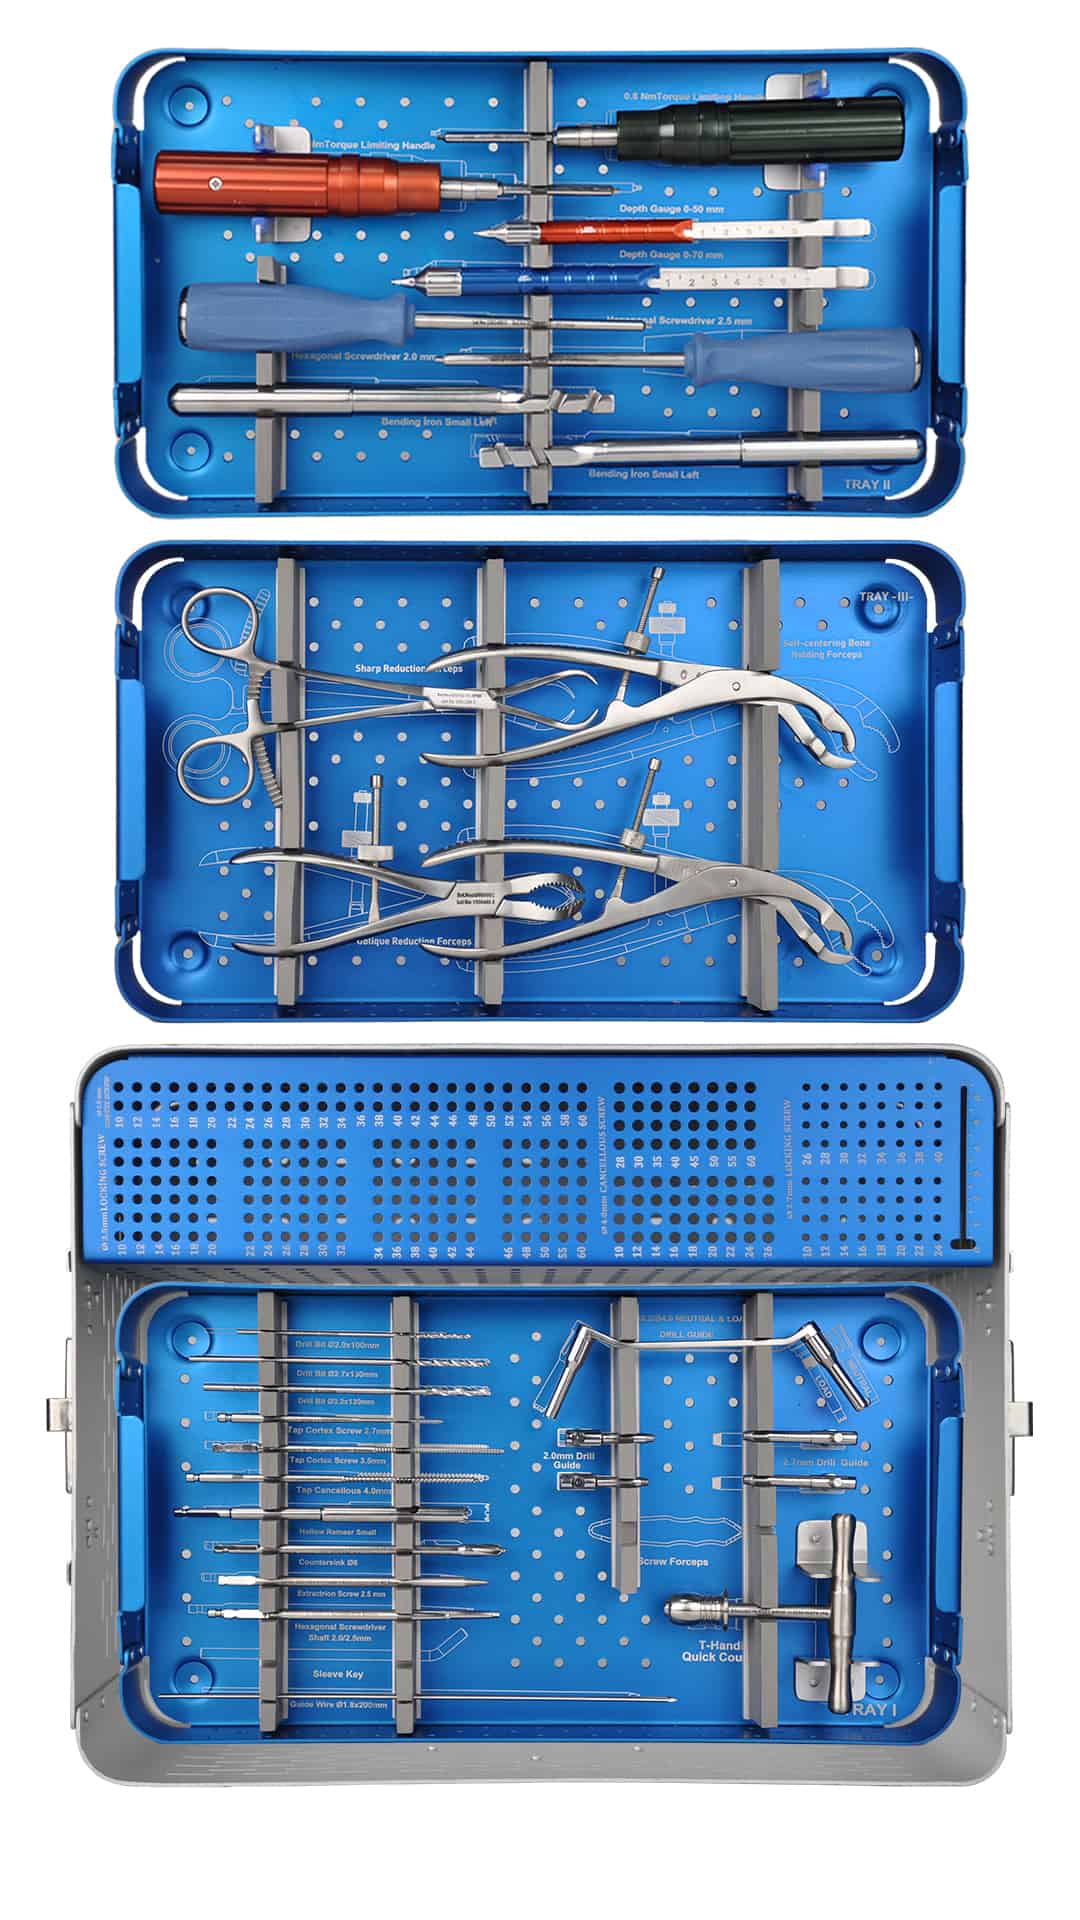 SMALL FRAGMENT LOCKING NON-LOCKING PLATE SURGERY INSTRUMENT SET ORTIMPLANT